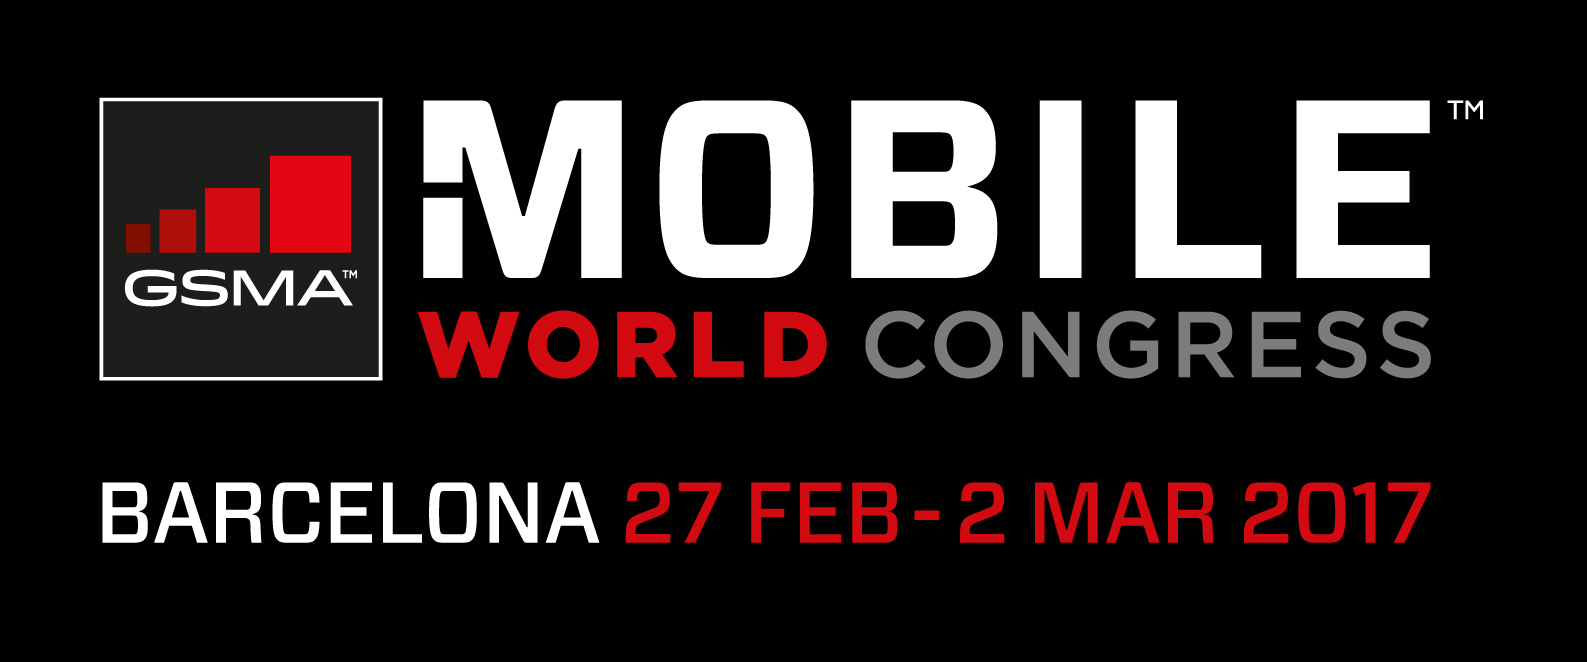 mobile-global-event-the-technews